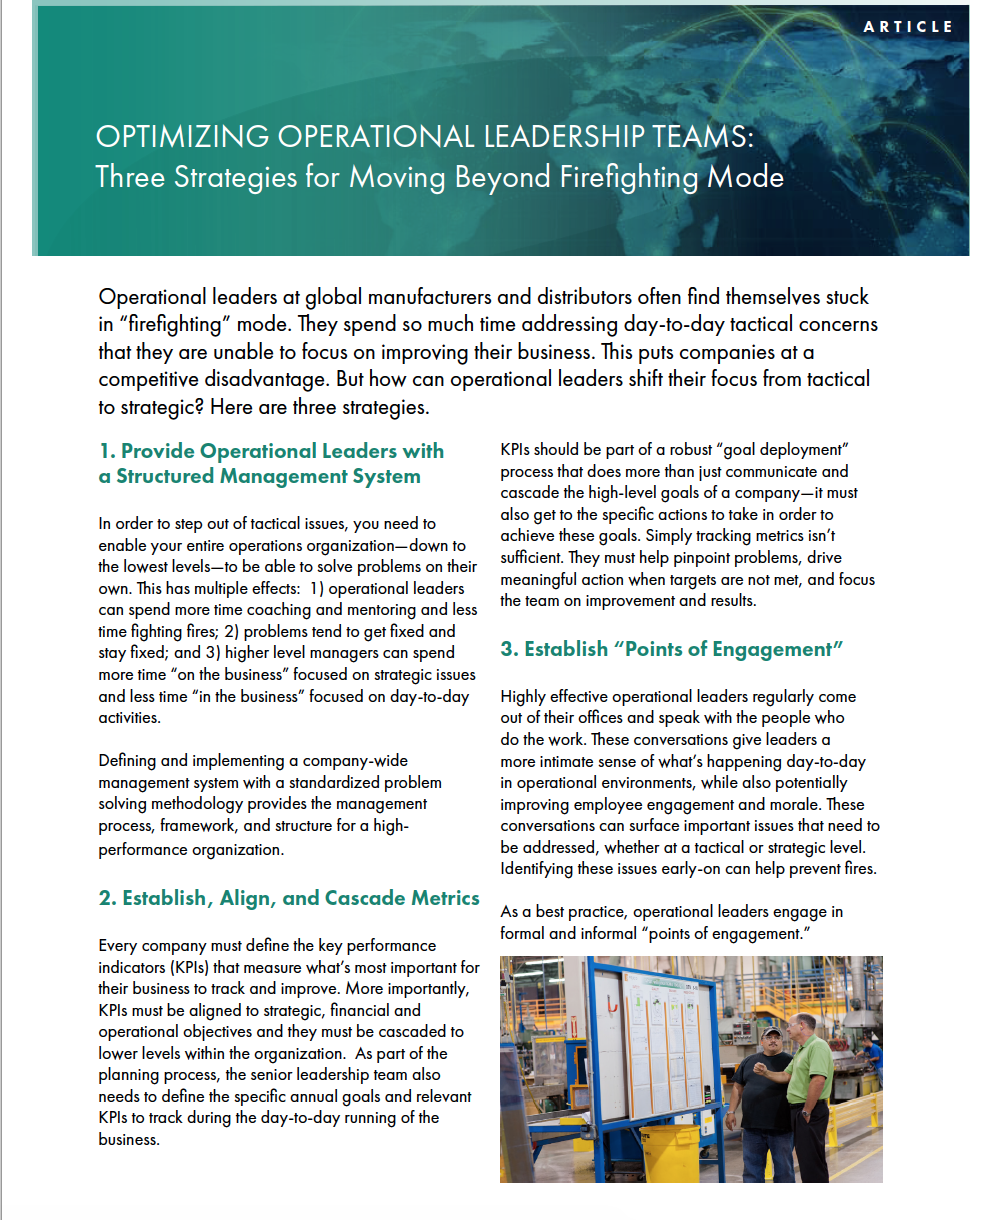 OPTIMIZING OPERATIONAL LEADERSHIP TEAMS: Three Strategies for Moving Beyond Firefighting Mode